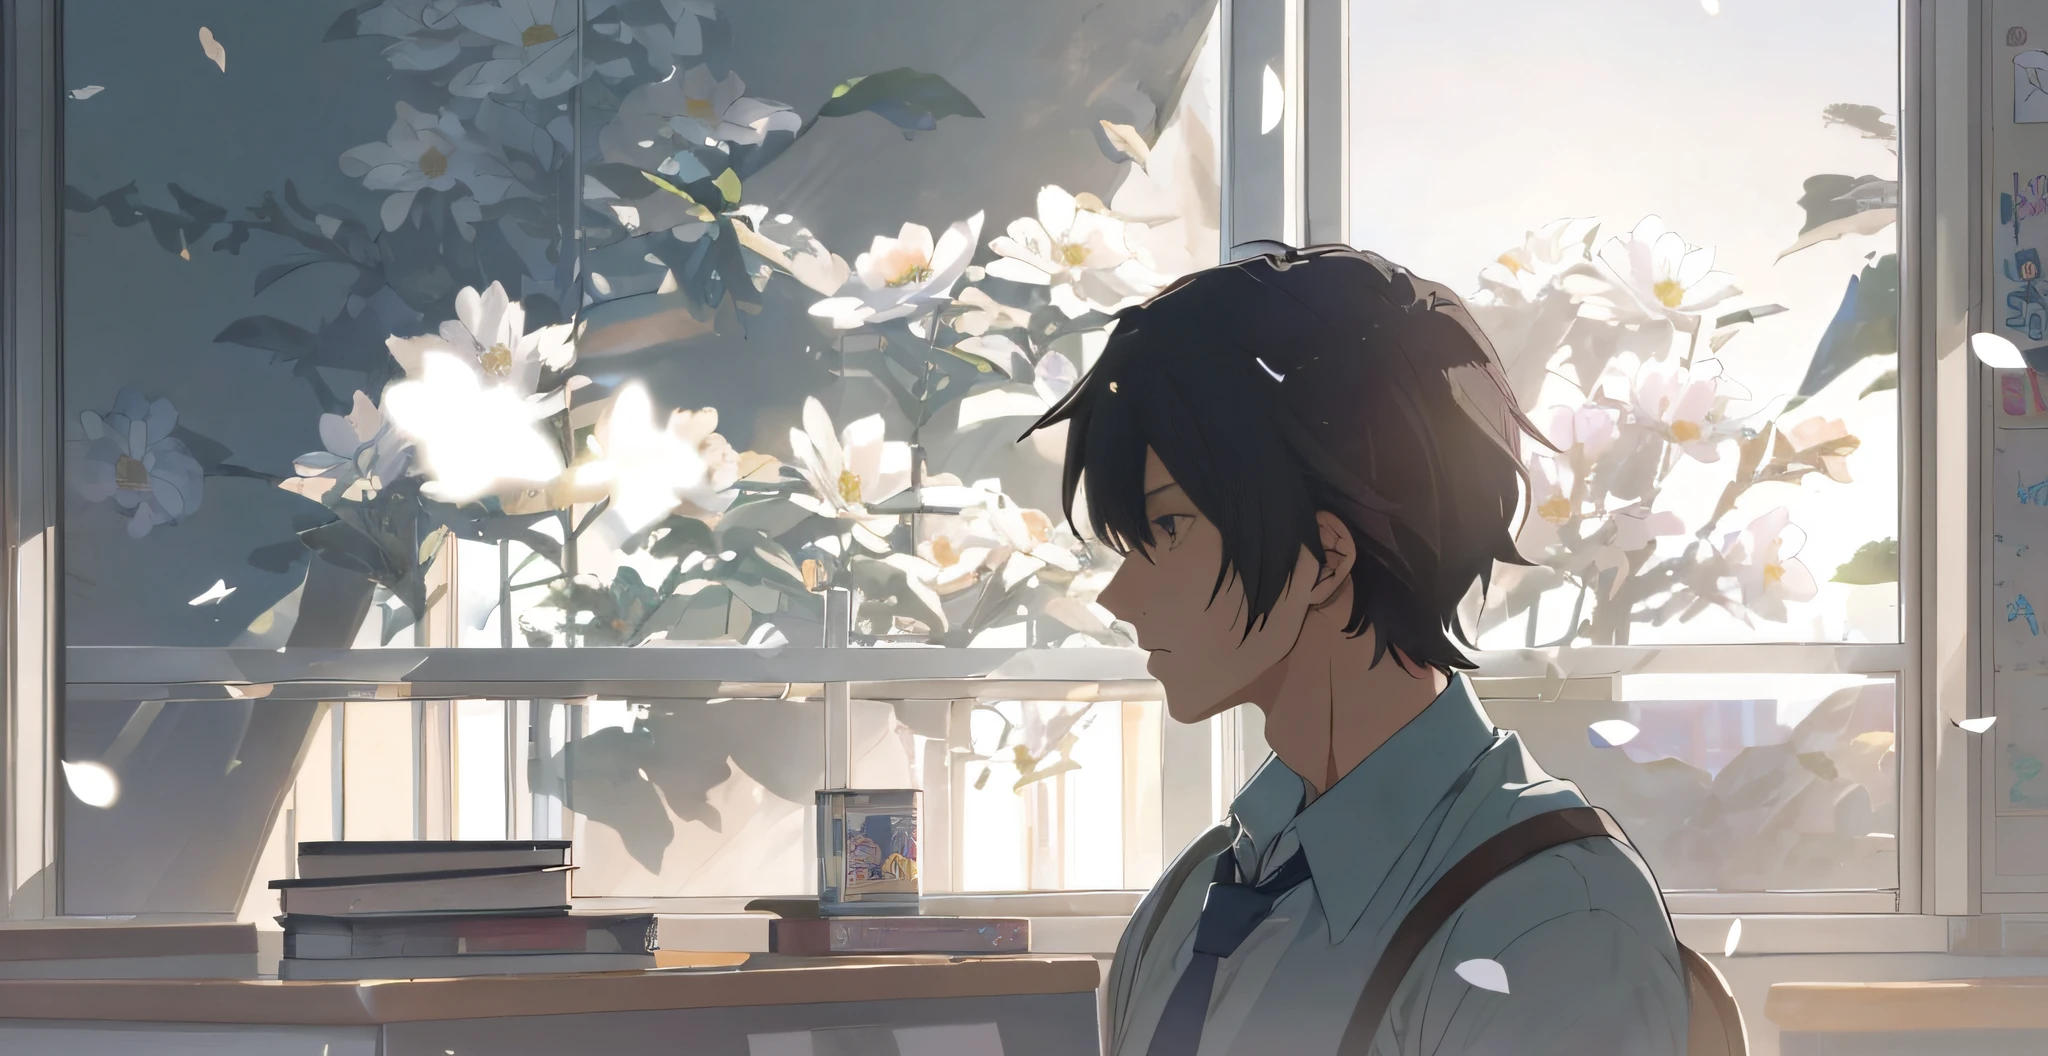 (best quality), (masterpiece), high details, extremely_detailed_CG_unity_8k_wallpaper, man reading in a tie, classroom window, white petals, hyperrealism, strong contrast between light and shadow, Guvez and Shinkai Makoto style, gives this image a sense of traveling, and inspiration.